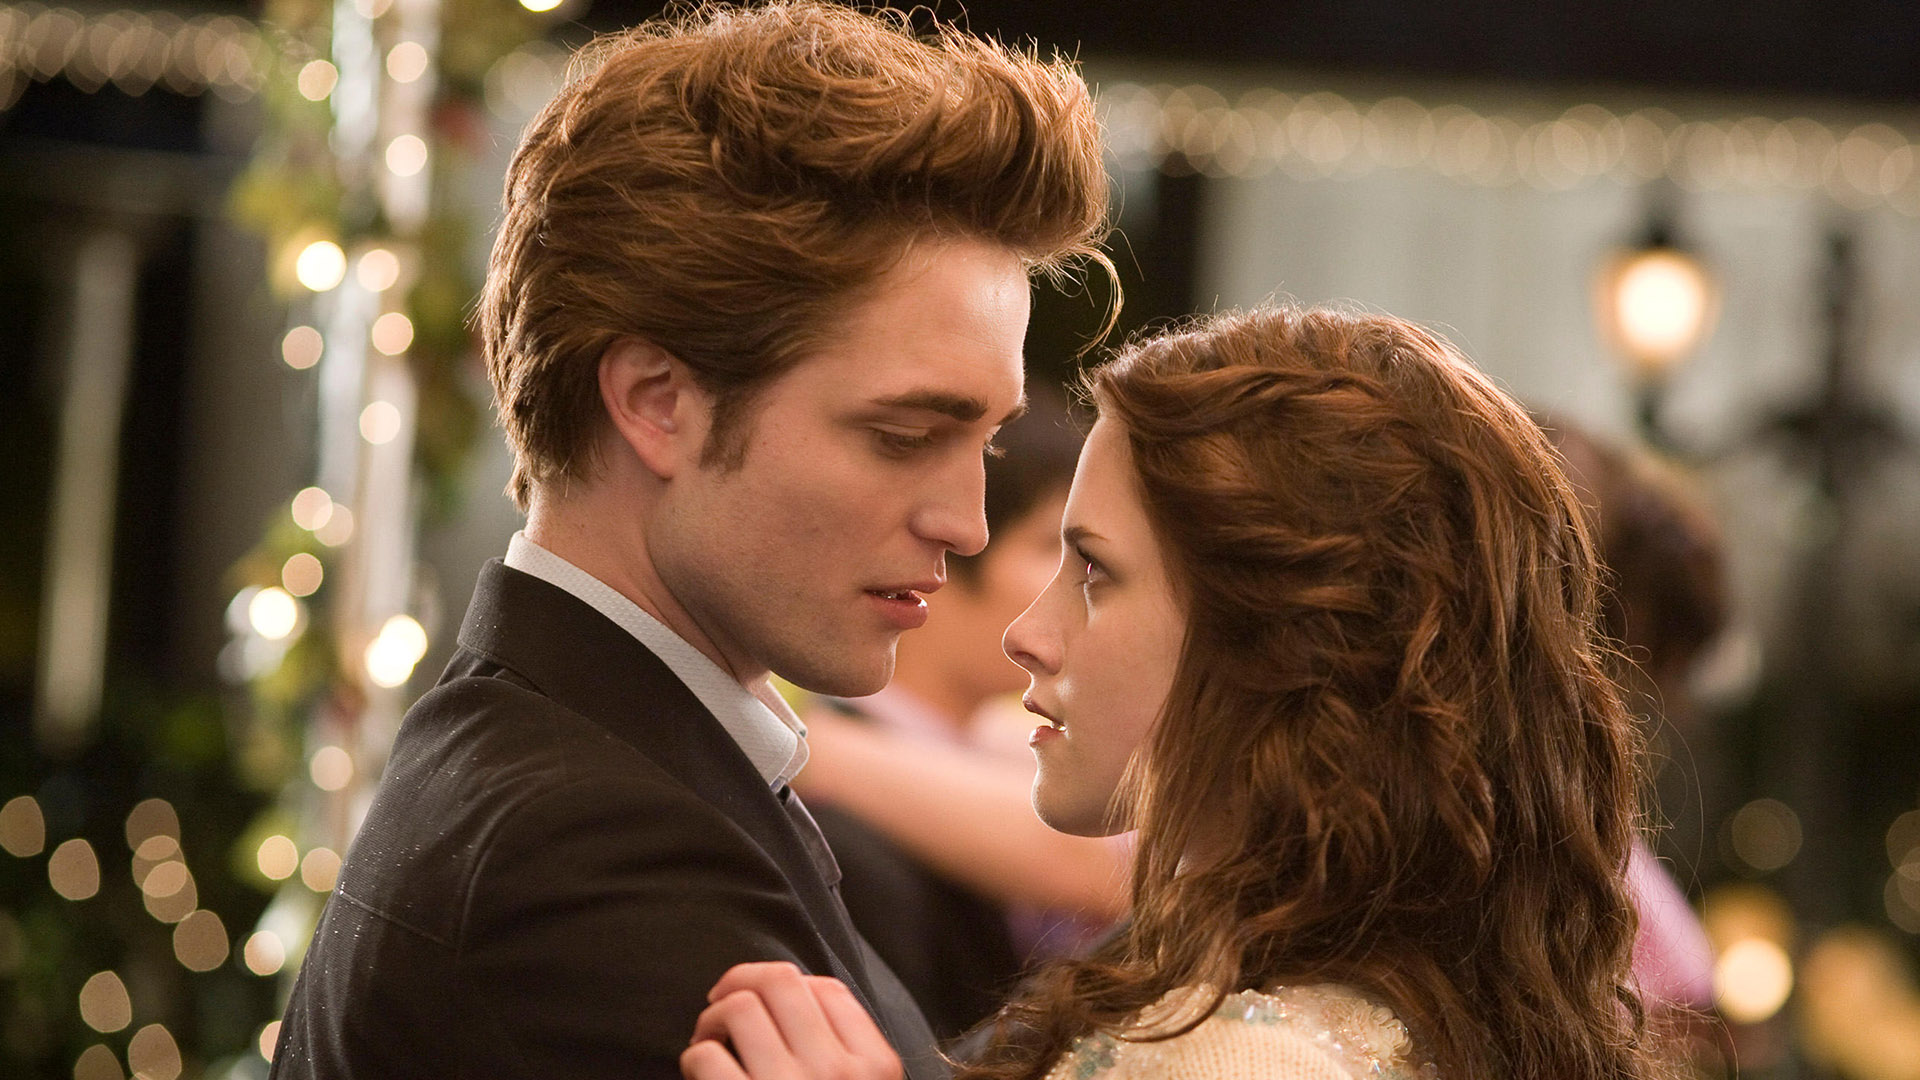 The Richest Twilight Actors, Ranked From Lowest to Highest